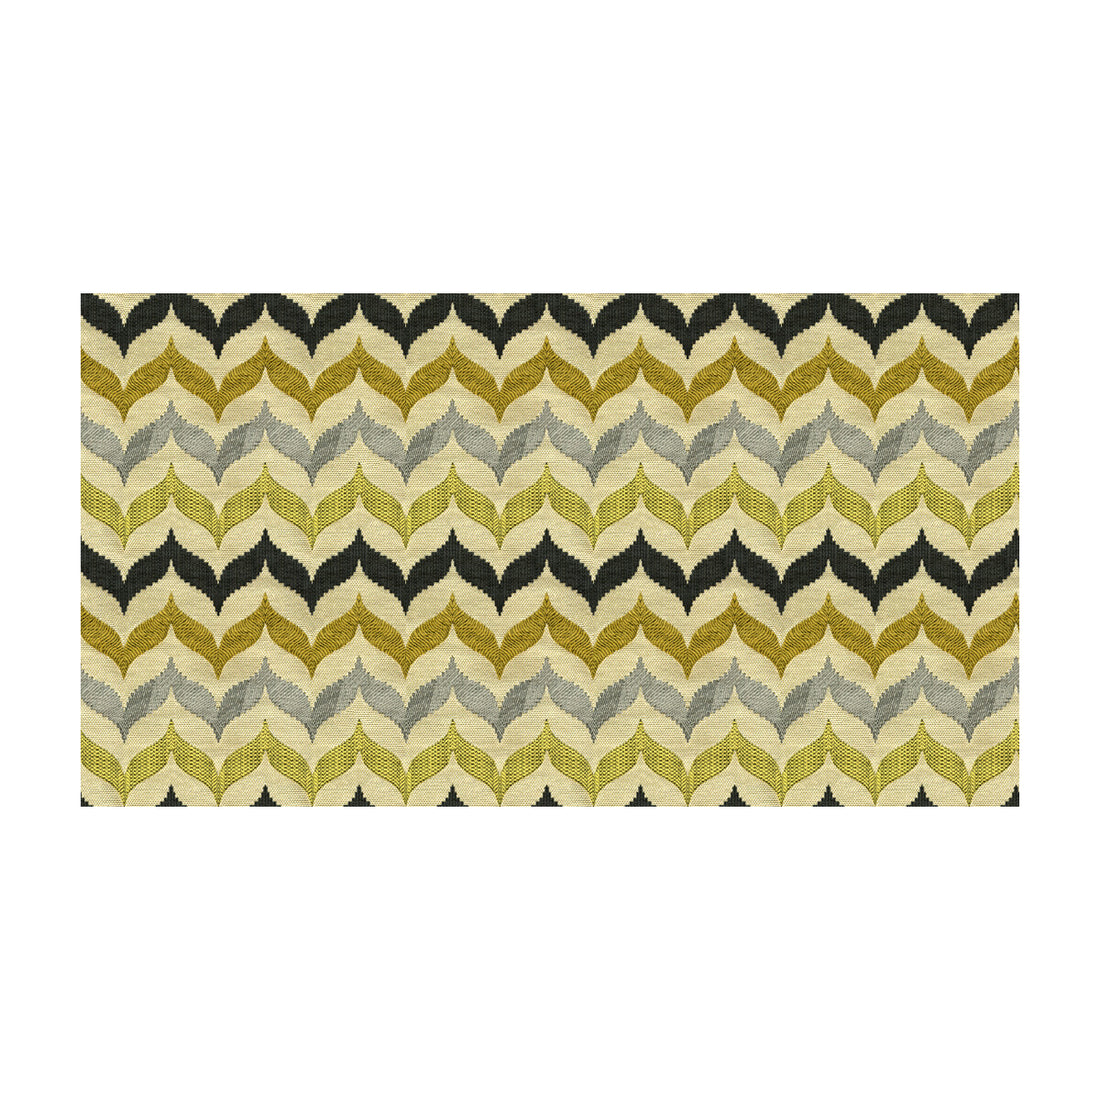 Andora fabric in citron color - pattern 33640.1623.0 - by Kravet Contract in the Jonathan Adler Clarity collection